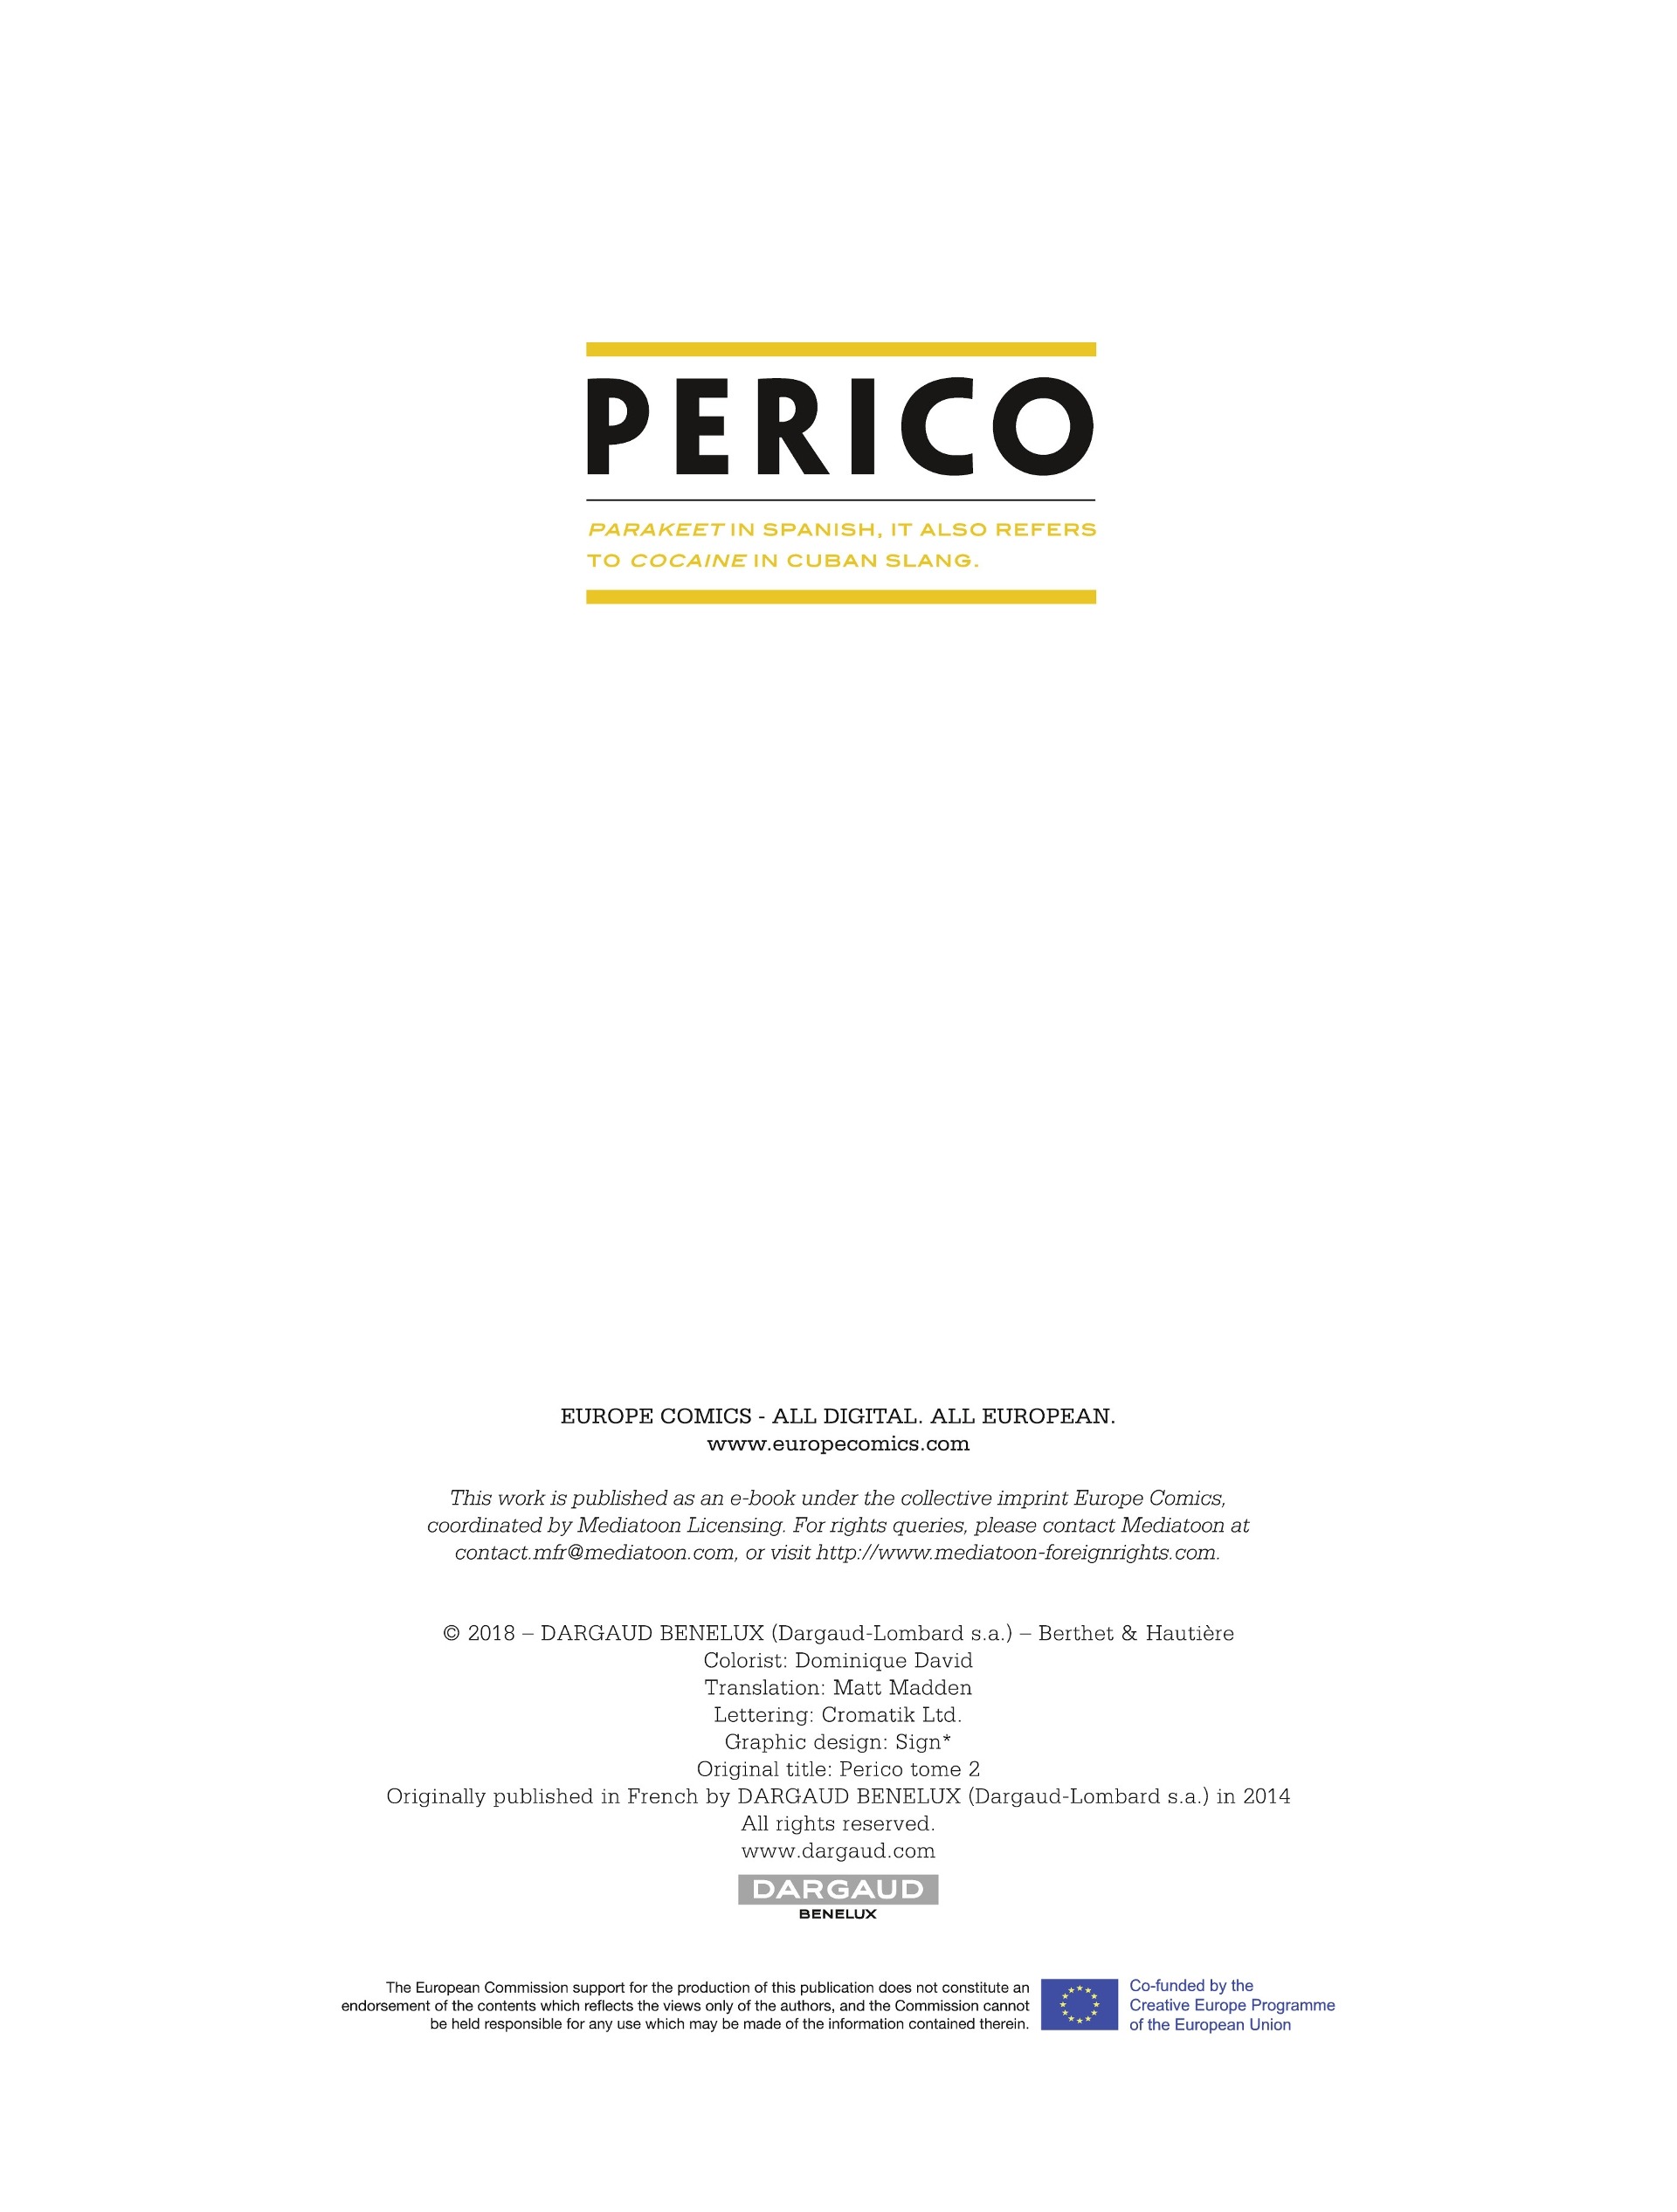 Read online Perico comic -  Issue #2 - 4